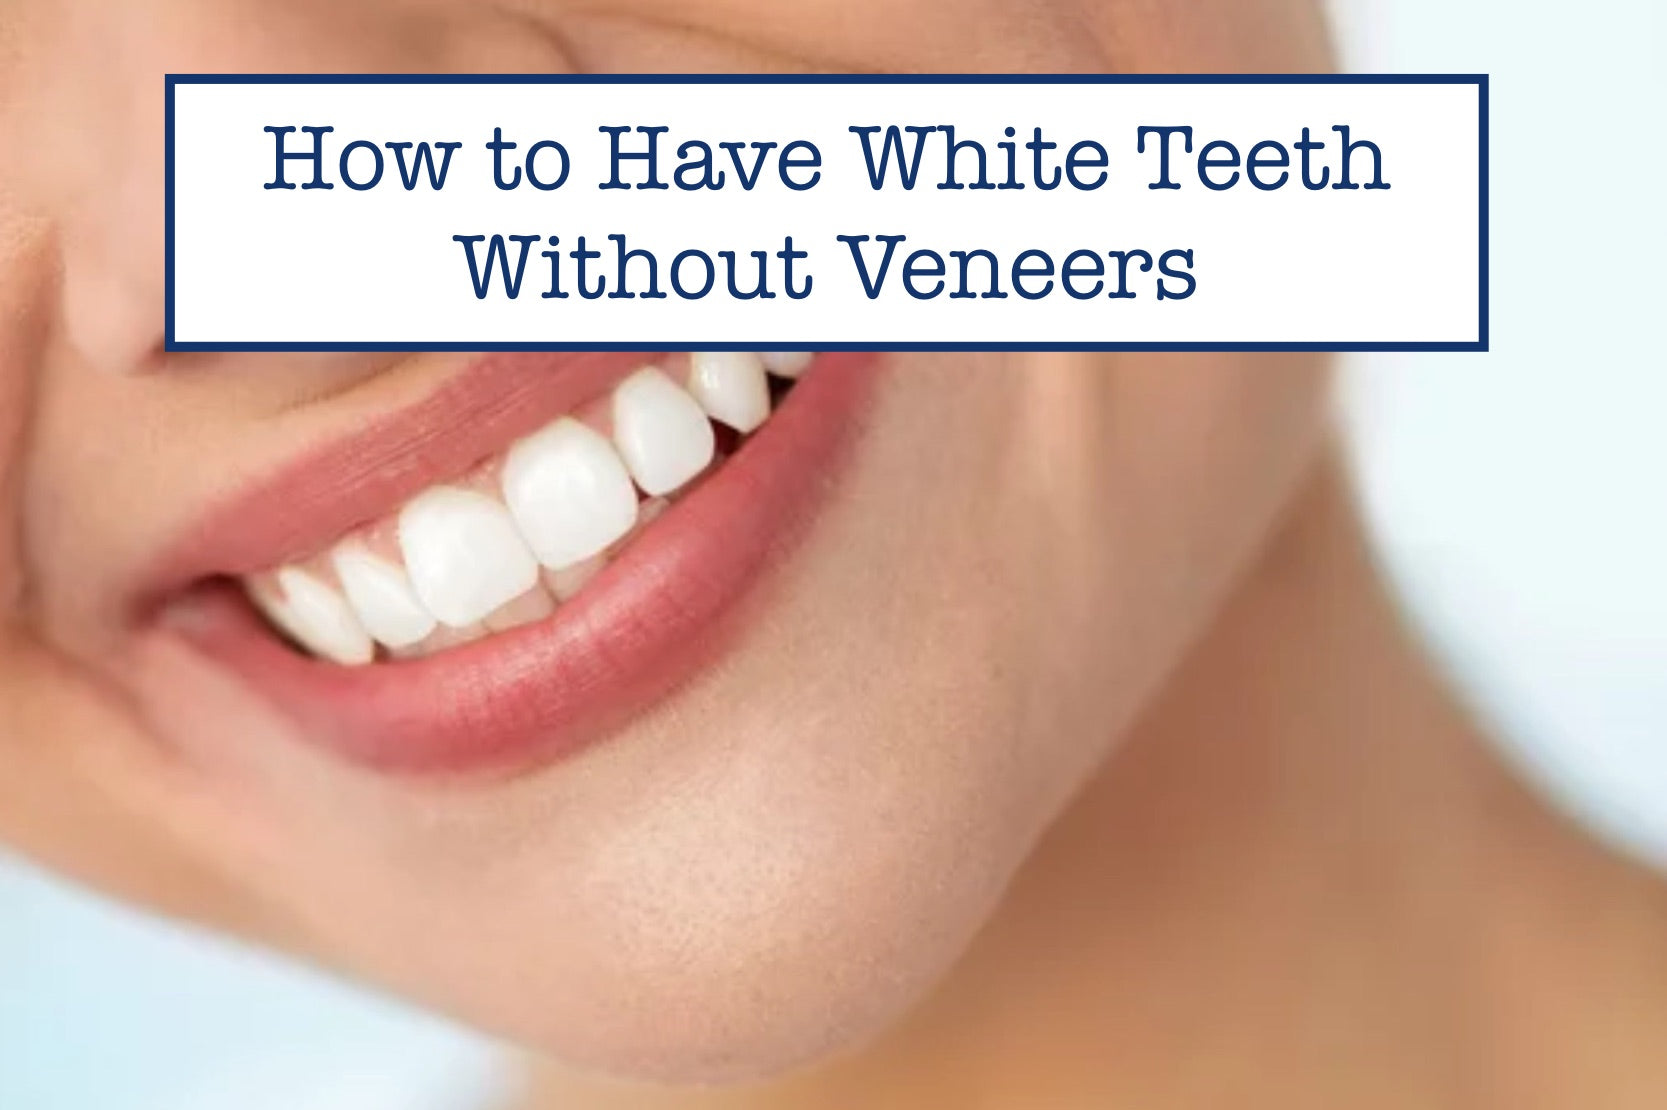 How to Have White Teeth Without Veneers